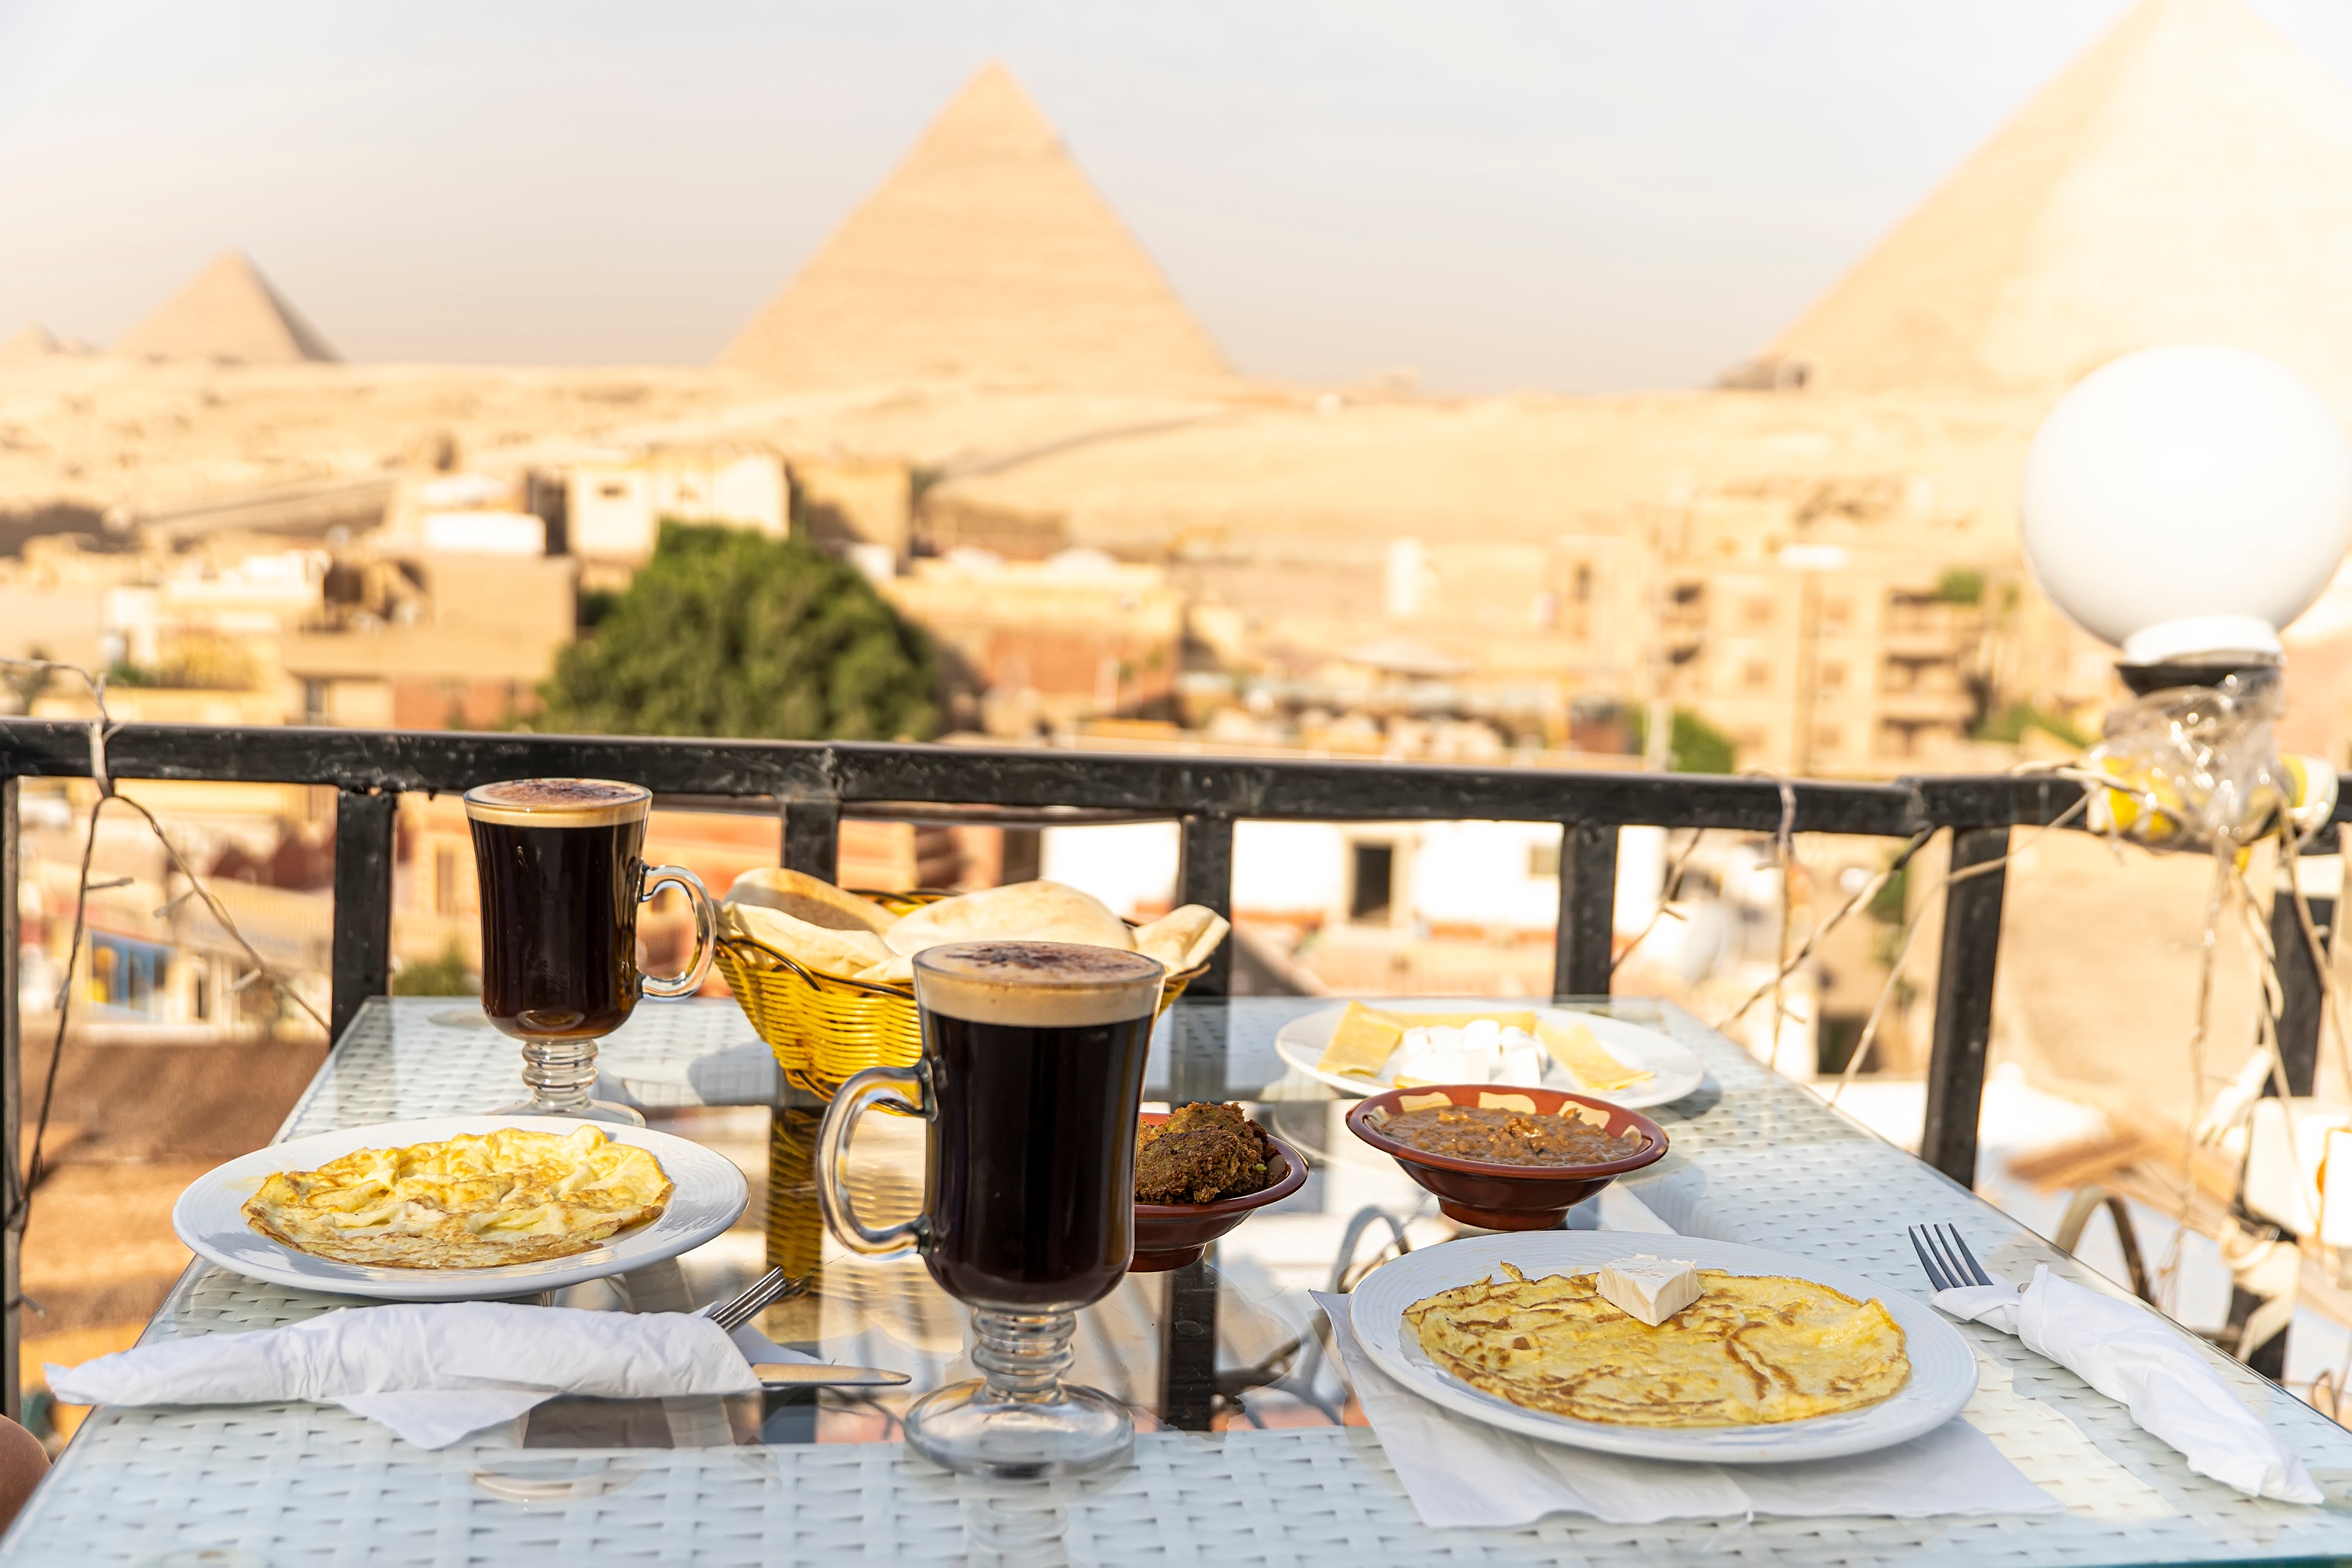 A table in an outdoor restaurant with a fantastically beautiful view of the great pyramids of Giza. Cairo. Egypt.